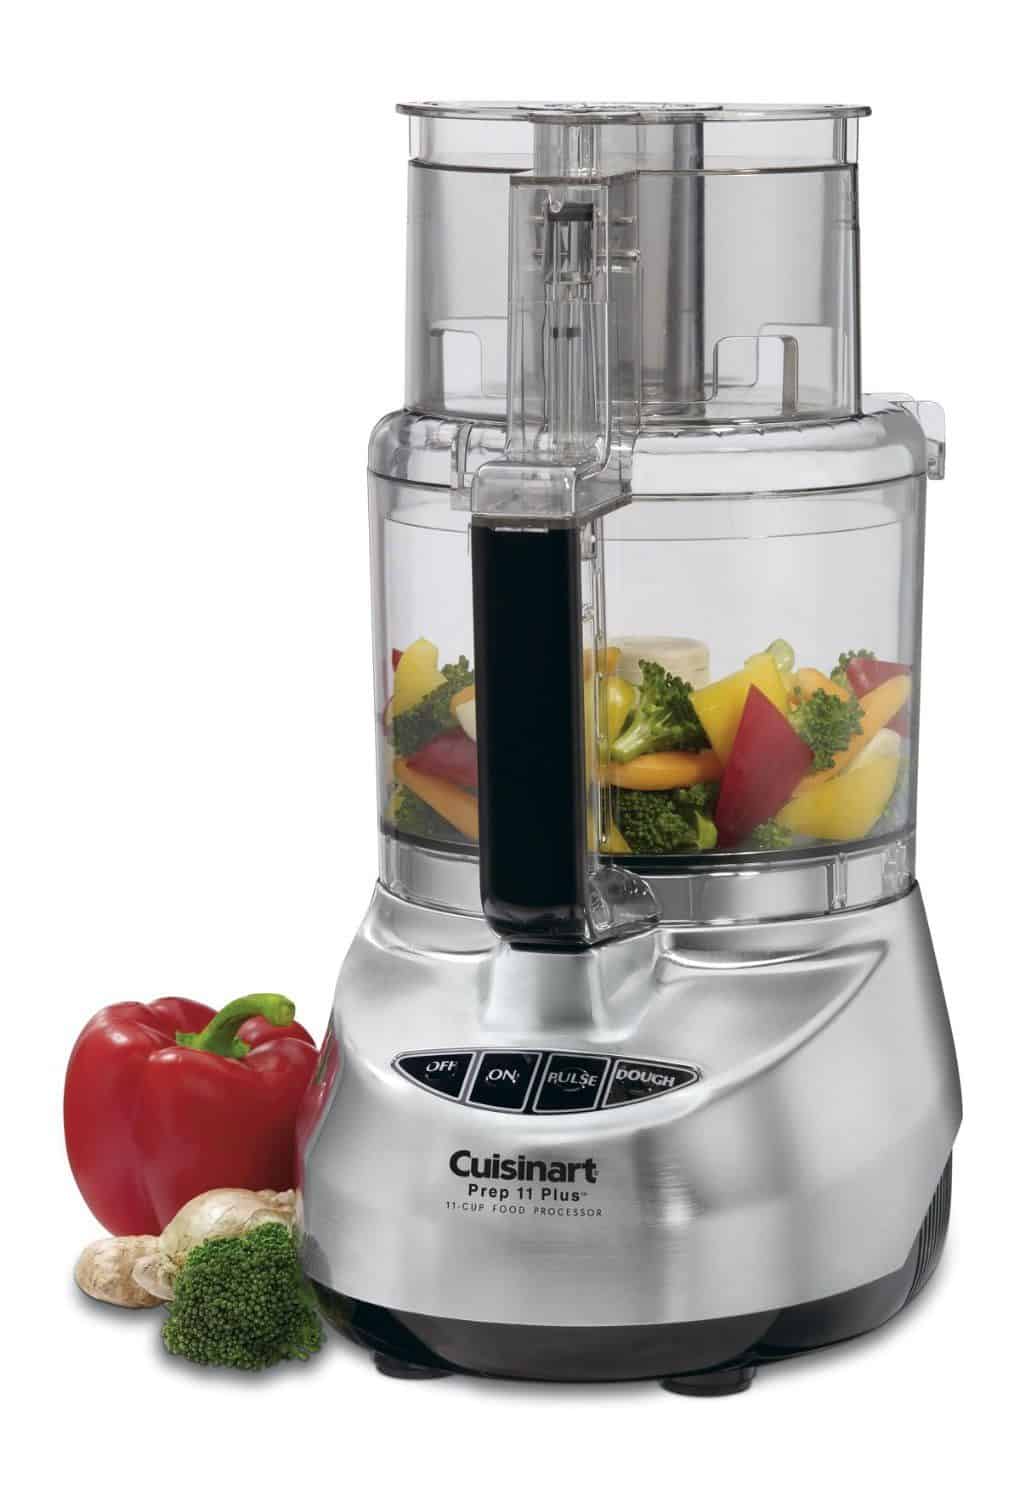 What types of owner's manuals does Cuisinart offer online?